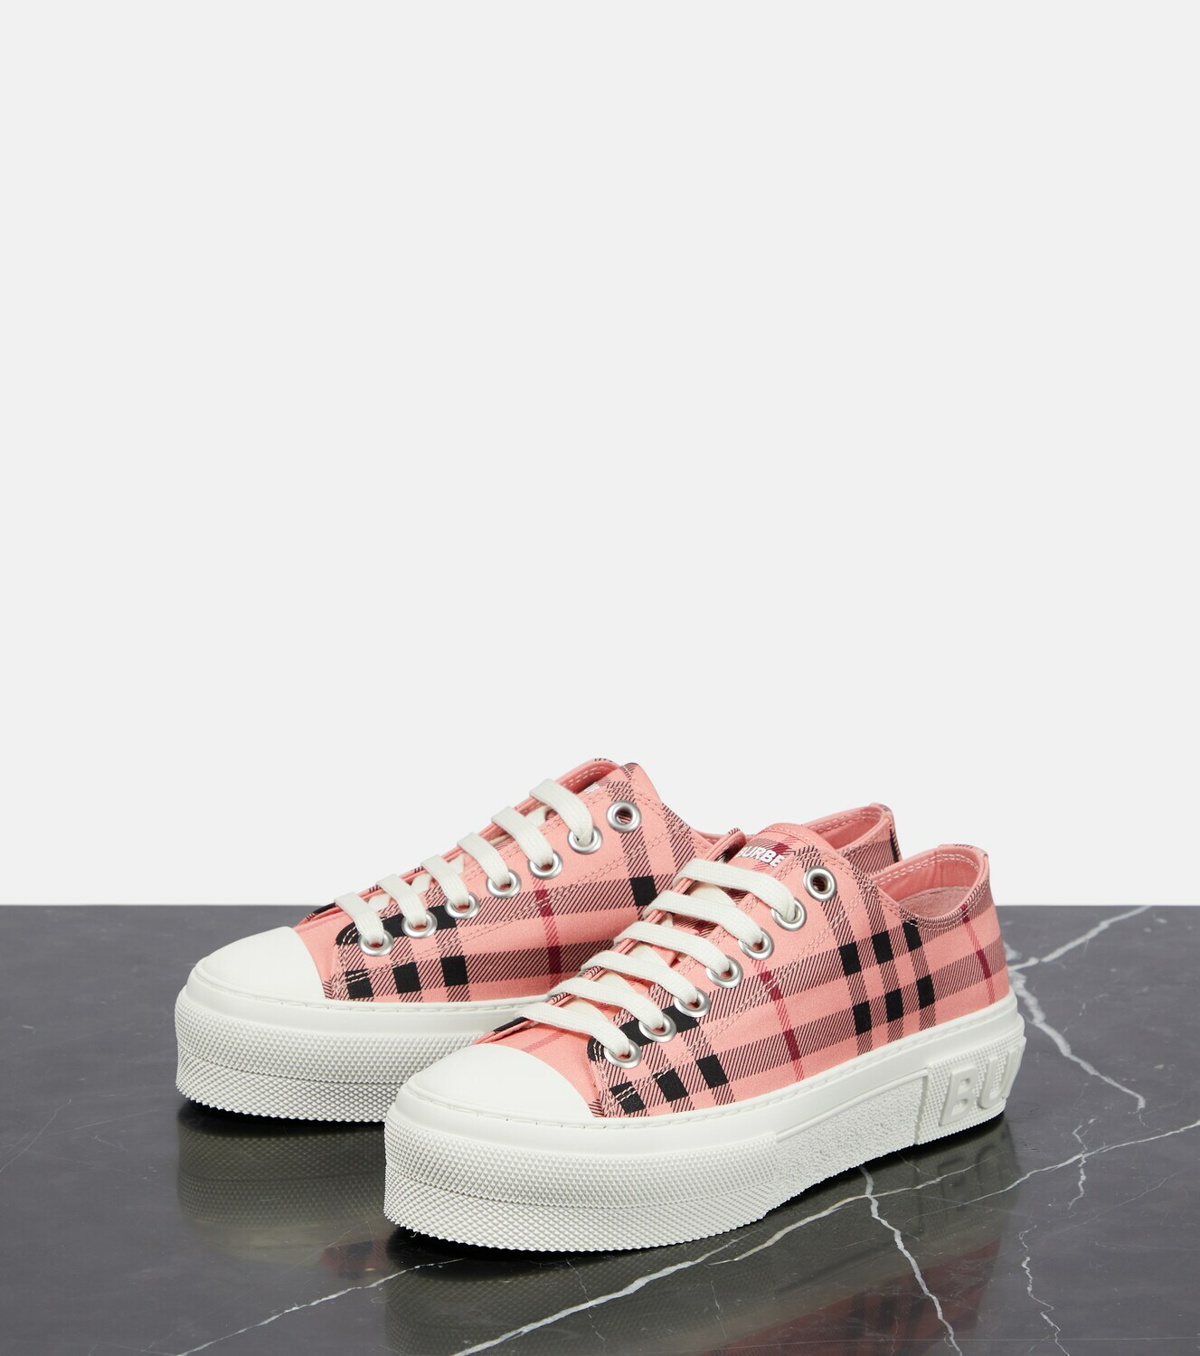 Ekd and monogram print cotton sneakers by Burberry